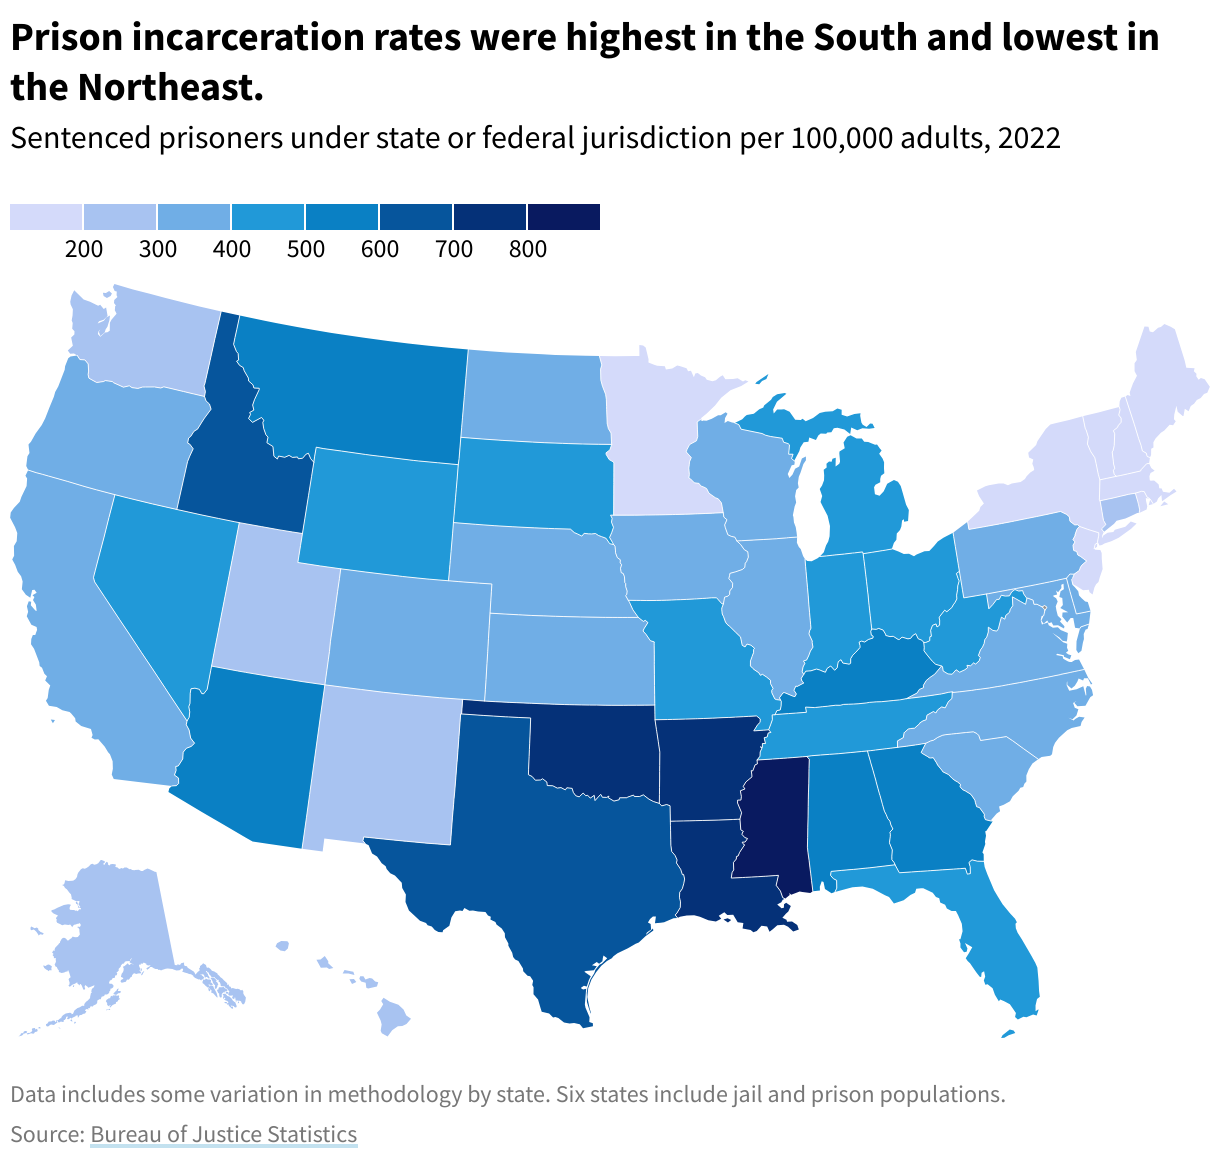 A map of sentenced prisoners in state or federal correctional facilities per 100,000 adults in 2022. Prison incarceration rates are highest in Southeastern states and lowest in New England.